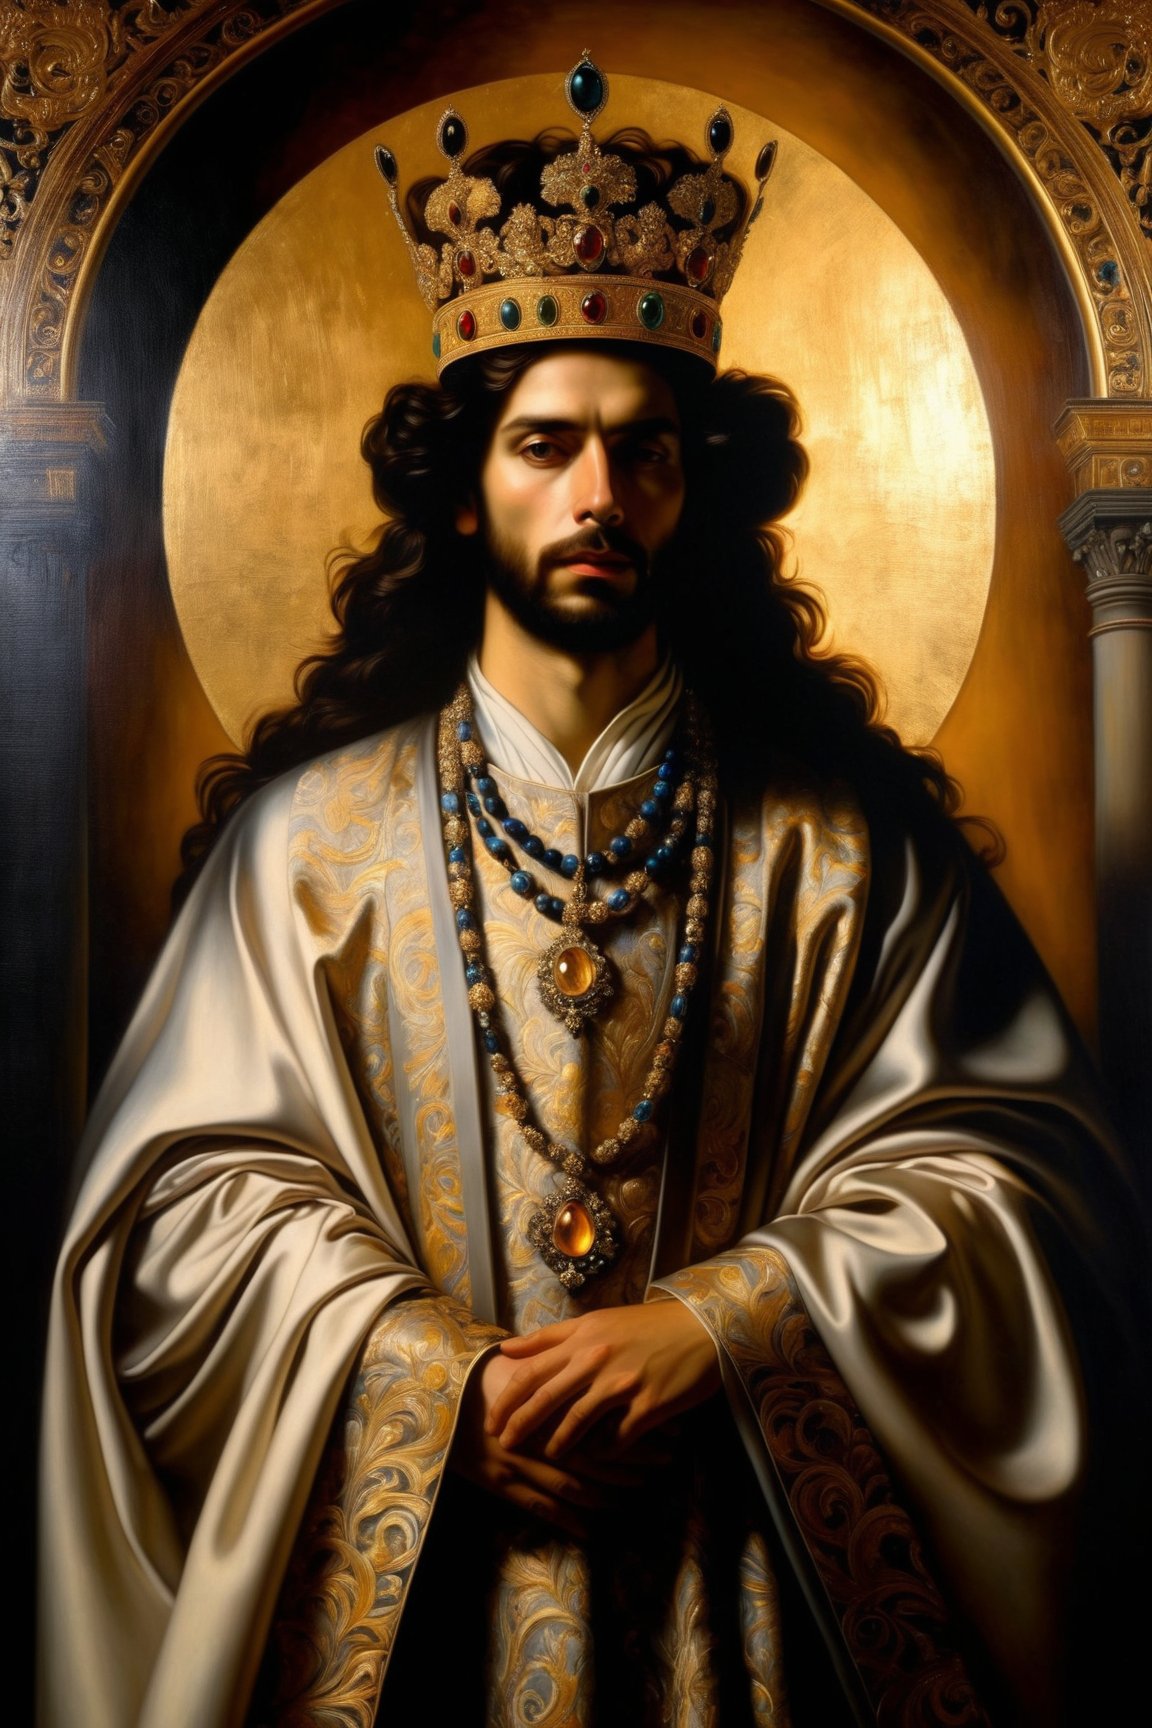 A highly detailed portrait of a regal monarch, adorned in a flowing robe of rich fabrics and embellished with intricate gold and silver designs. The painting is done in a refined oil painting style, with ethereal translucent layers that add depth and dimension to the image. The subject's enigmatic aura is captured through nuanced and detailed brushwork, while dramatic chiaroscuro illumination adds a sense of otherworldly grandeur. The painting is set against a subtle canvas texture, reminiscent of Gustav Klimt's decorative elegance, and features a ghostly serene presence that captivates the viewer. The image is a masterpiece, characterized by artistic finesse and a profound and moody backdrop that evokes the artistic techniques of Rembrandt and Caravaggio. The subject's eerily exquisite countenance and elaborate crown intricacies add to the painting's spectral monarch quality, while luminescent outlines and atmospheric profundity create a sense of otherworldly beauty. The painting is a true work of art, with a subtle blend of visible and vanishing edges that add to its spectral quality. The image is a true masterpiece, with a captivating eye contact that draws the viewer in and a whisper of ancient regality that adds to the painting's mystique.
